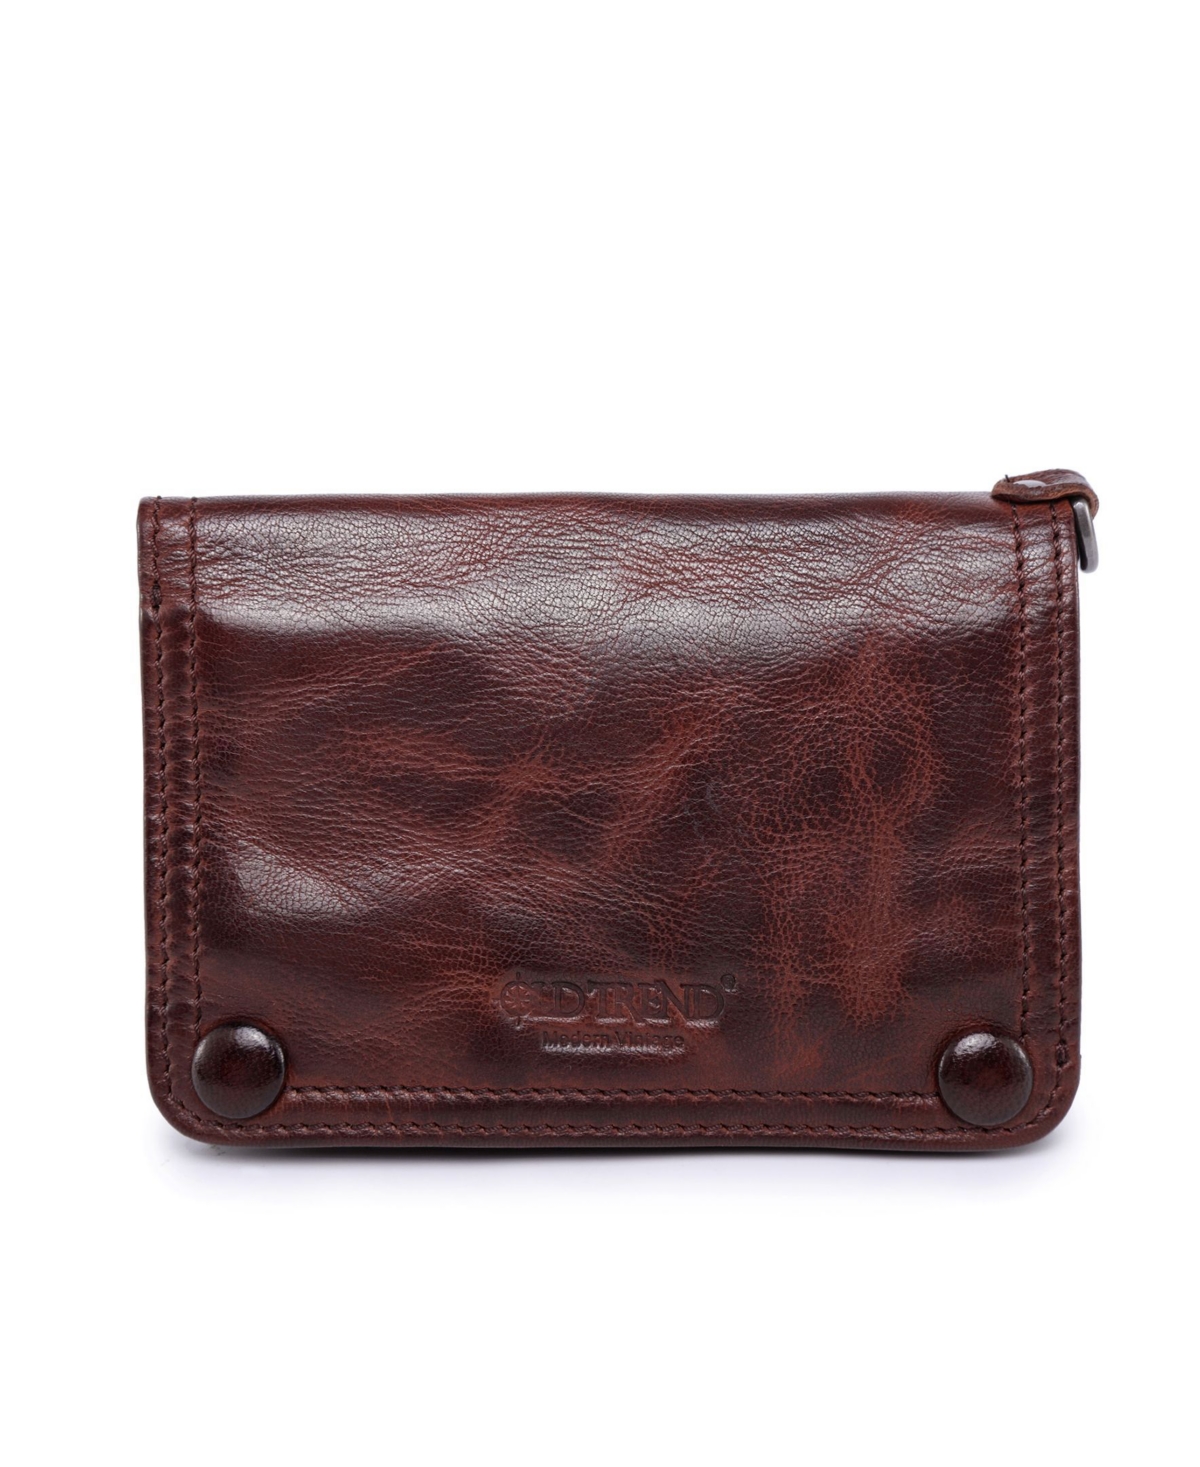 Women's Genuine Leather Basswood Clutch - Brown